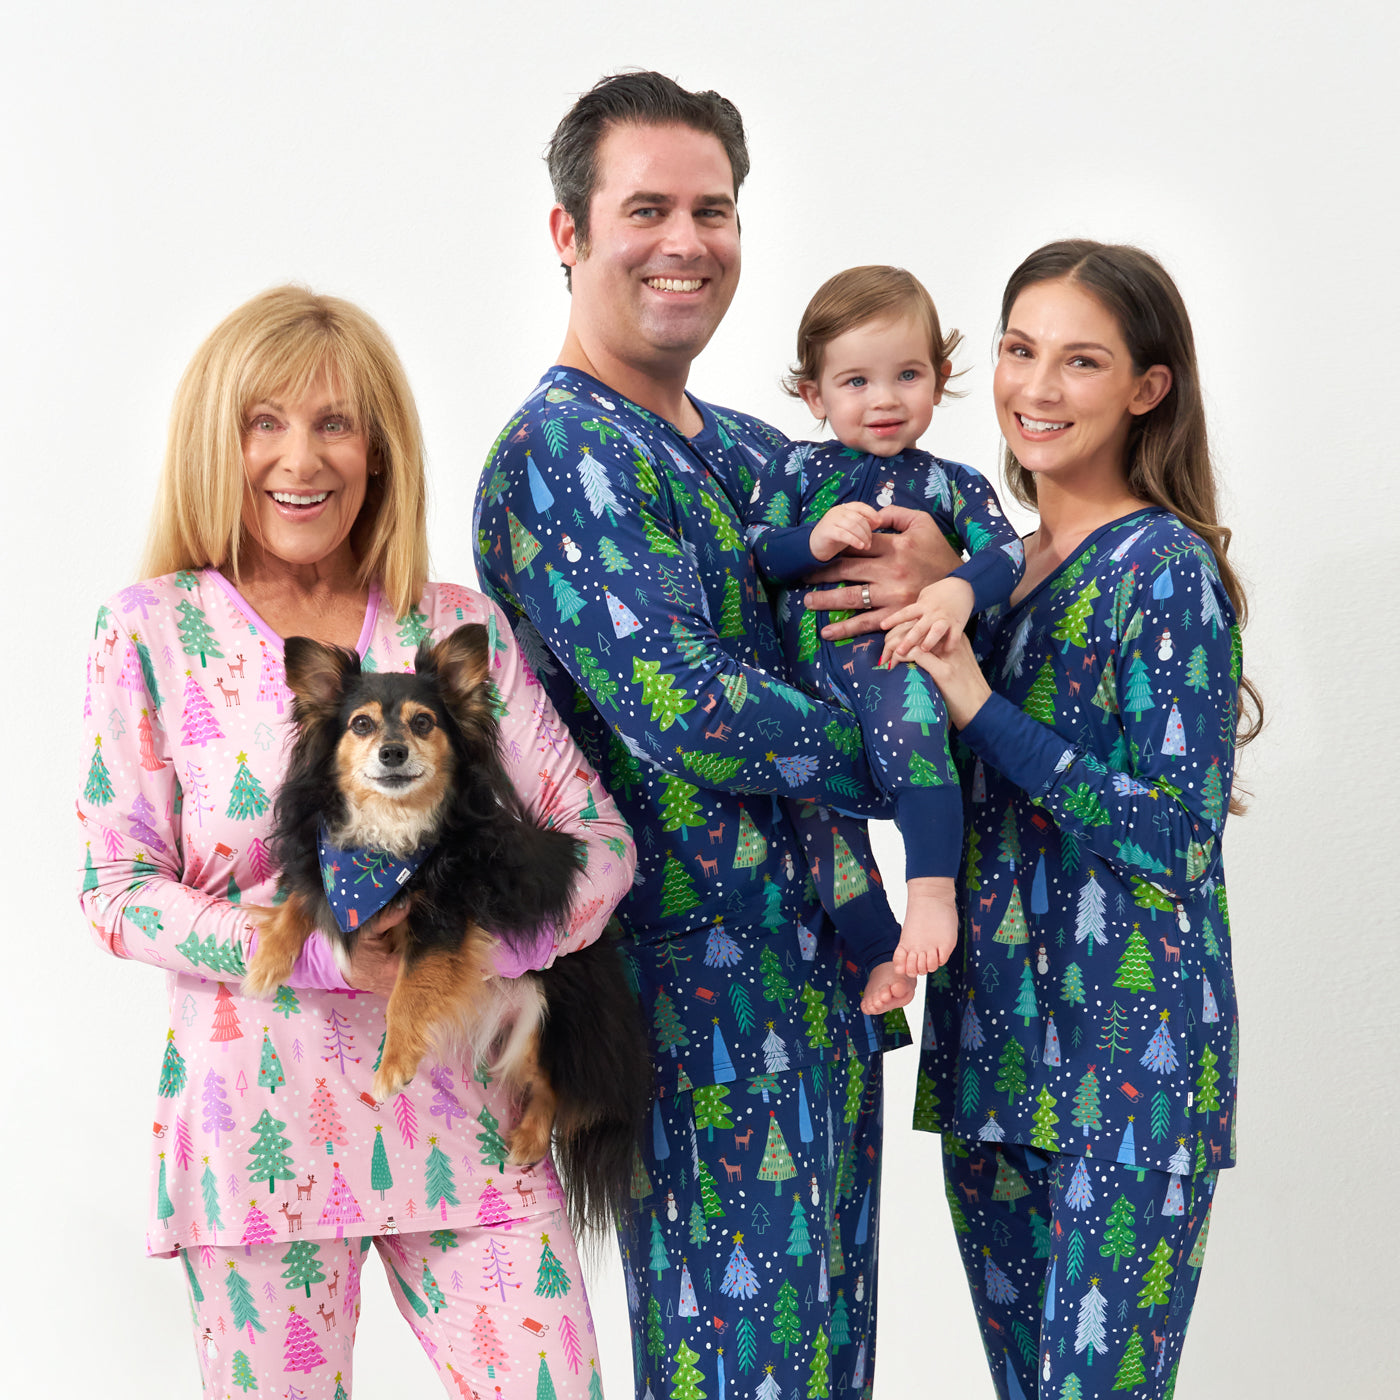 Family of four standing together with their dog. Grandma is wearing a women's Pink Merry and Bright women's pajama top and bottoms holding a Small dog wearing a Blue Merry and Bright pet bandana. Mom and Dad are wearing Blue Merry and Bright printed matching pajama tops and bottoms in men's and women's styles. Their child is matching wearing a Blue Merry and Bright zippy